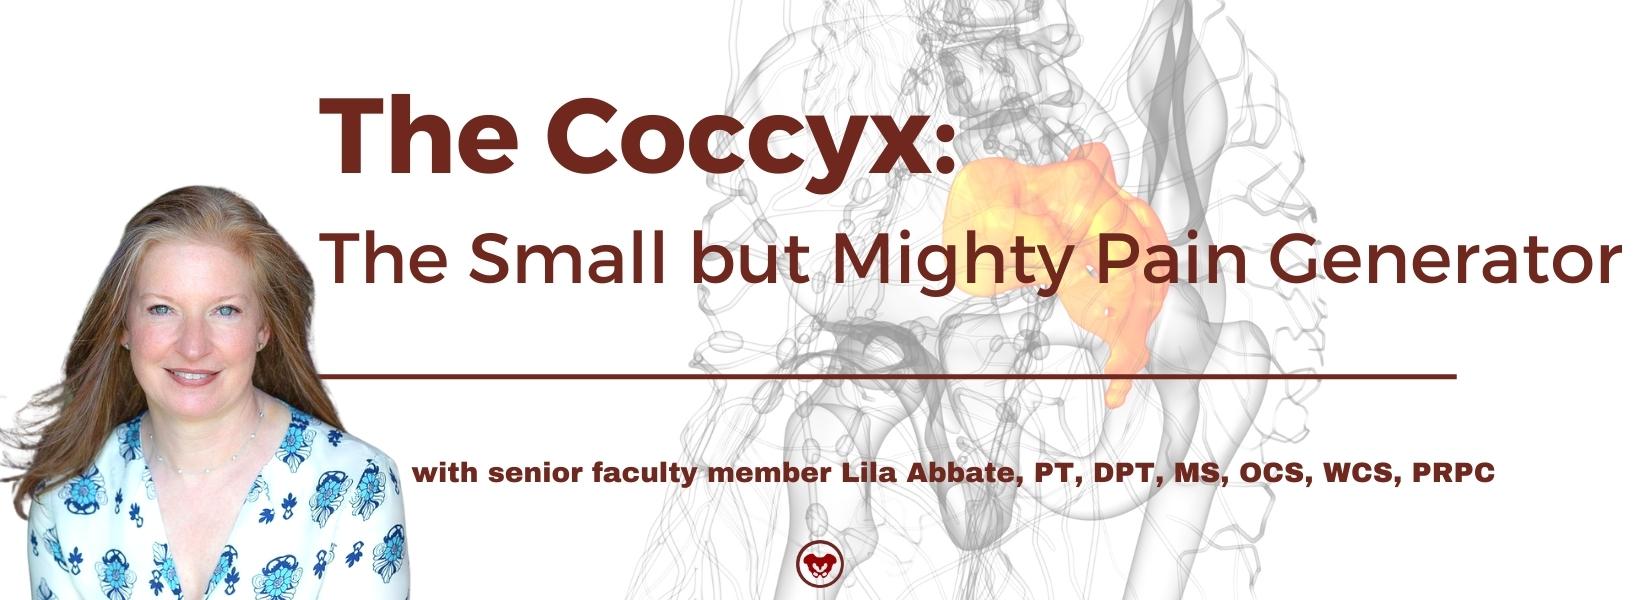 The Coccyx: The Small but Mighty Pain Generator